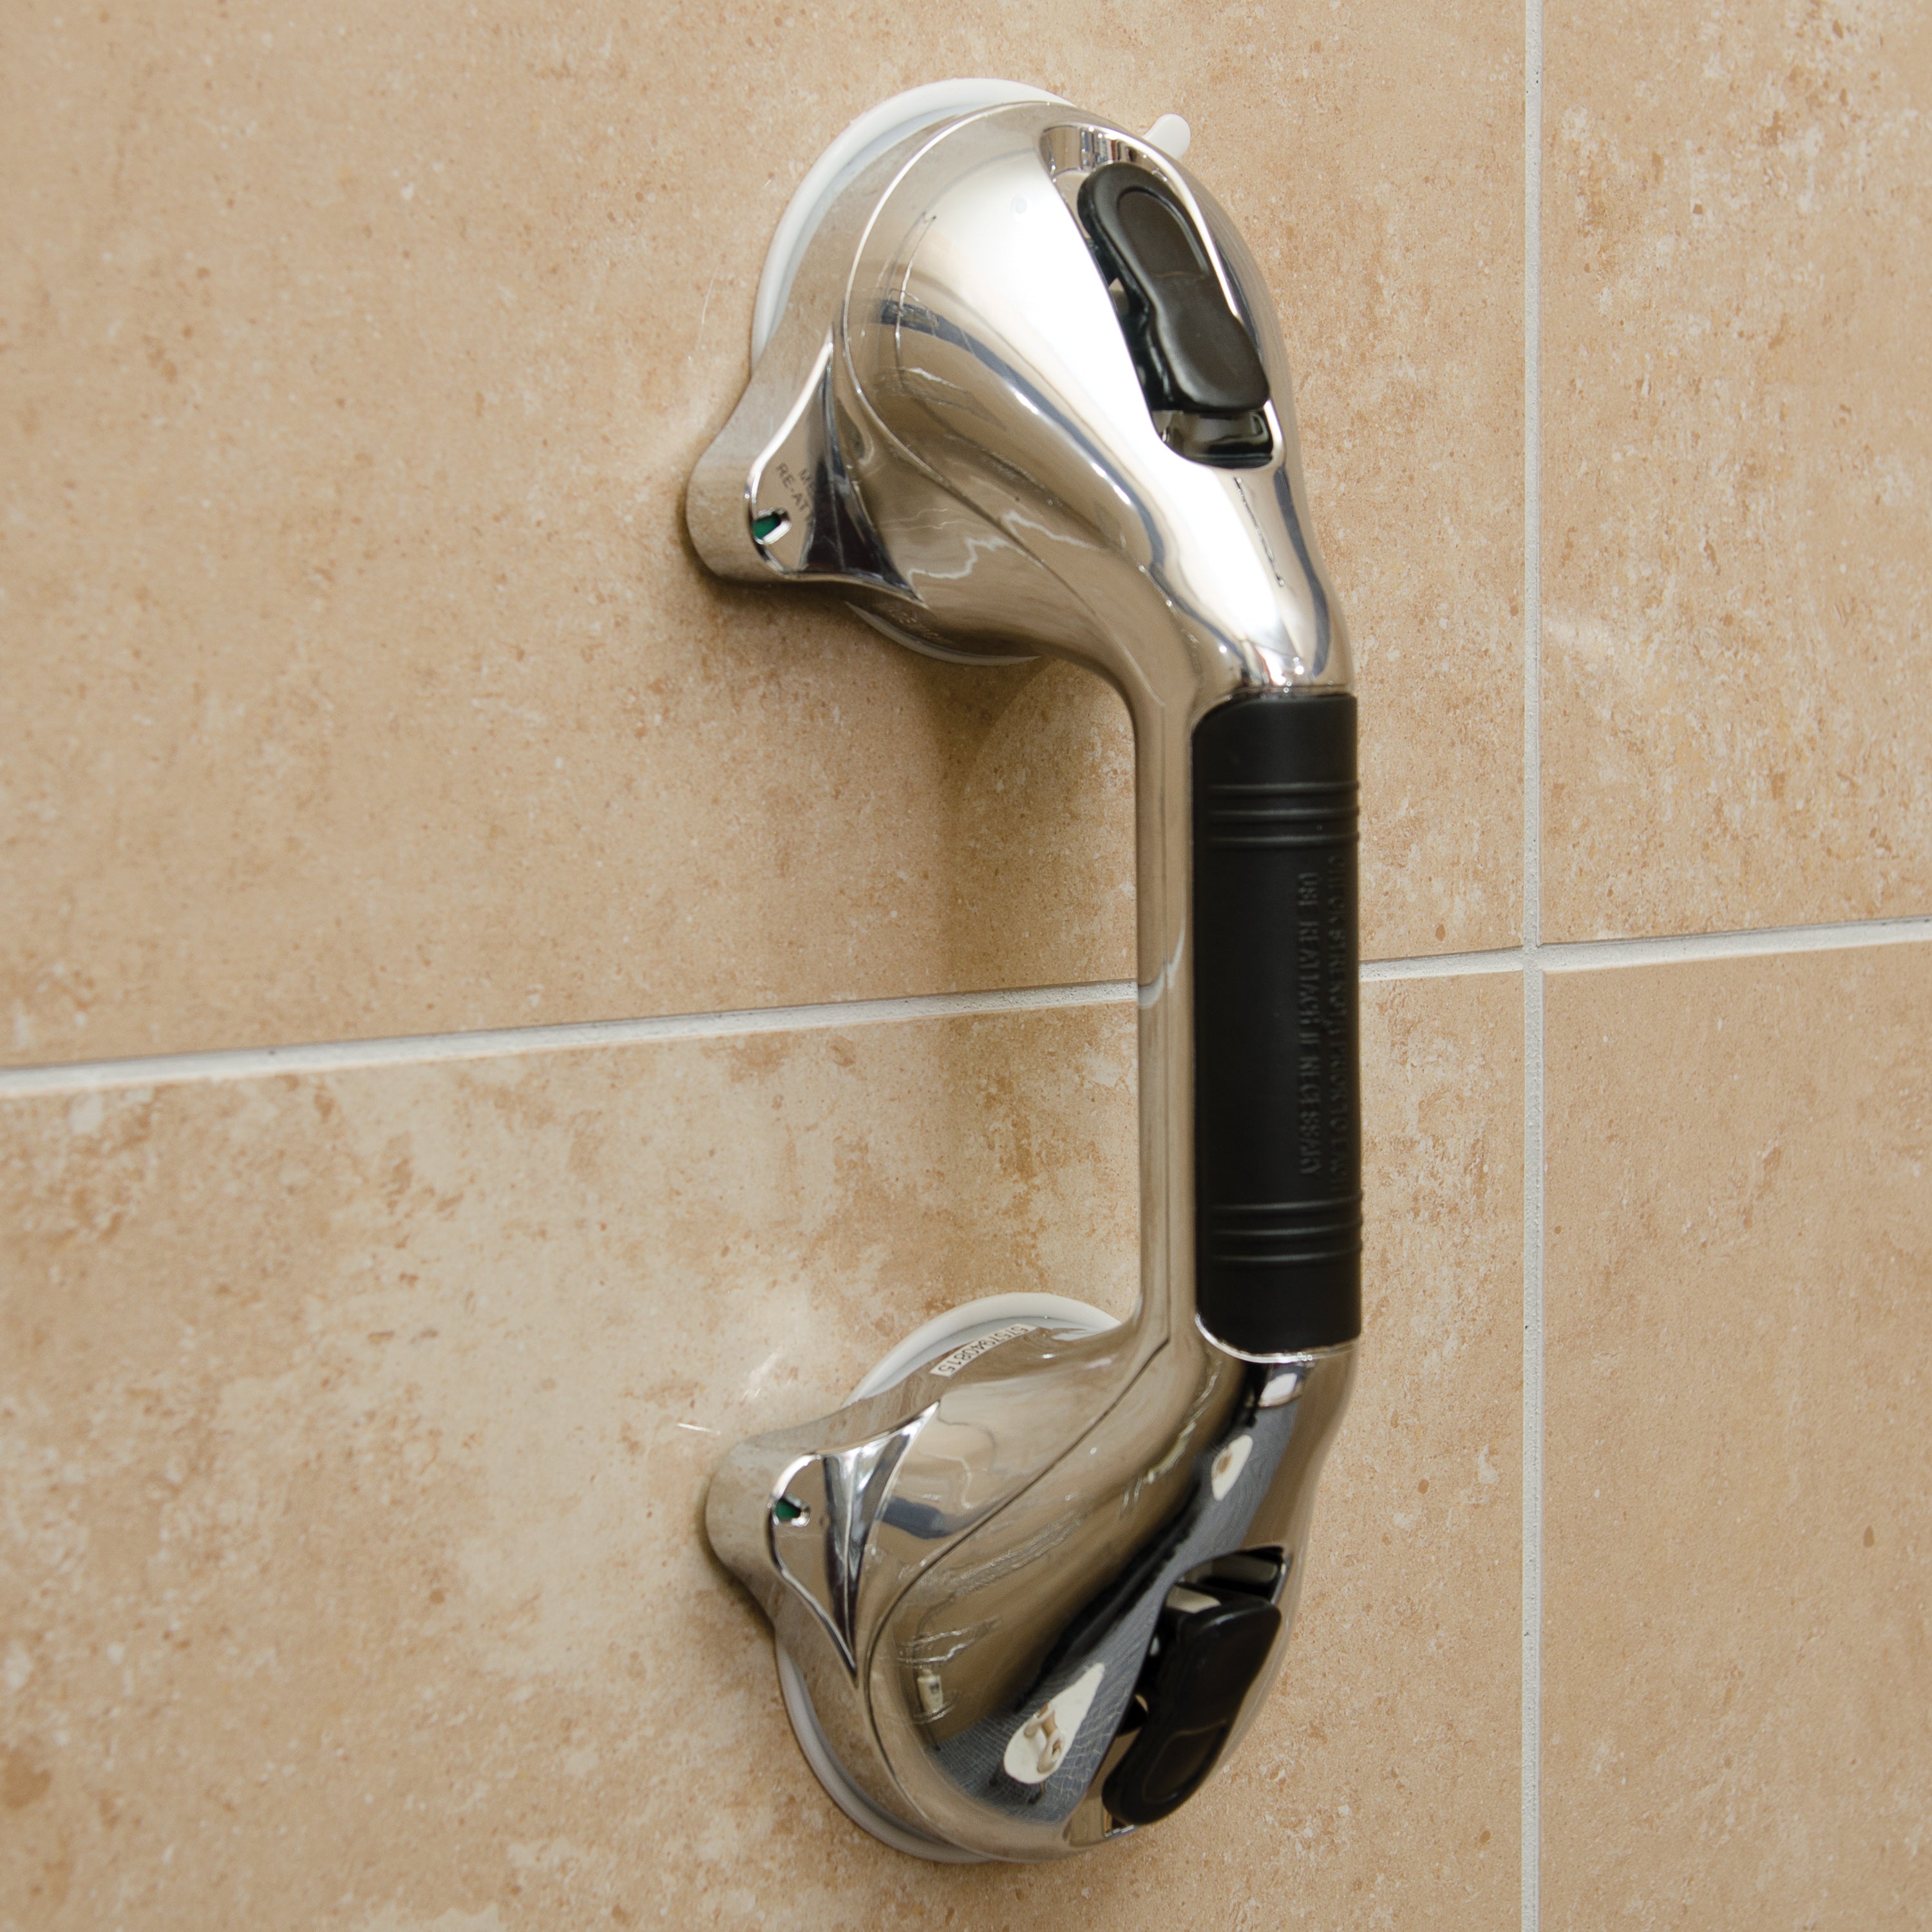 HealthSmart Suction Cup Grab Bars with BactiX Antimicrobial AM-521-1562-1912